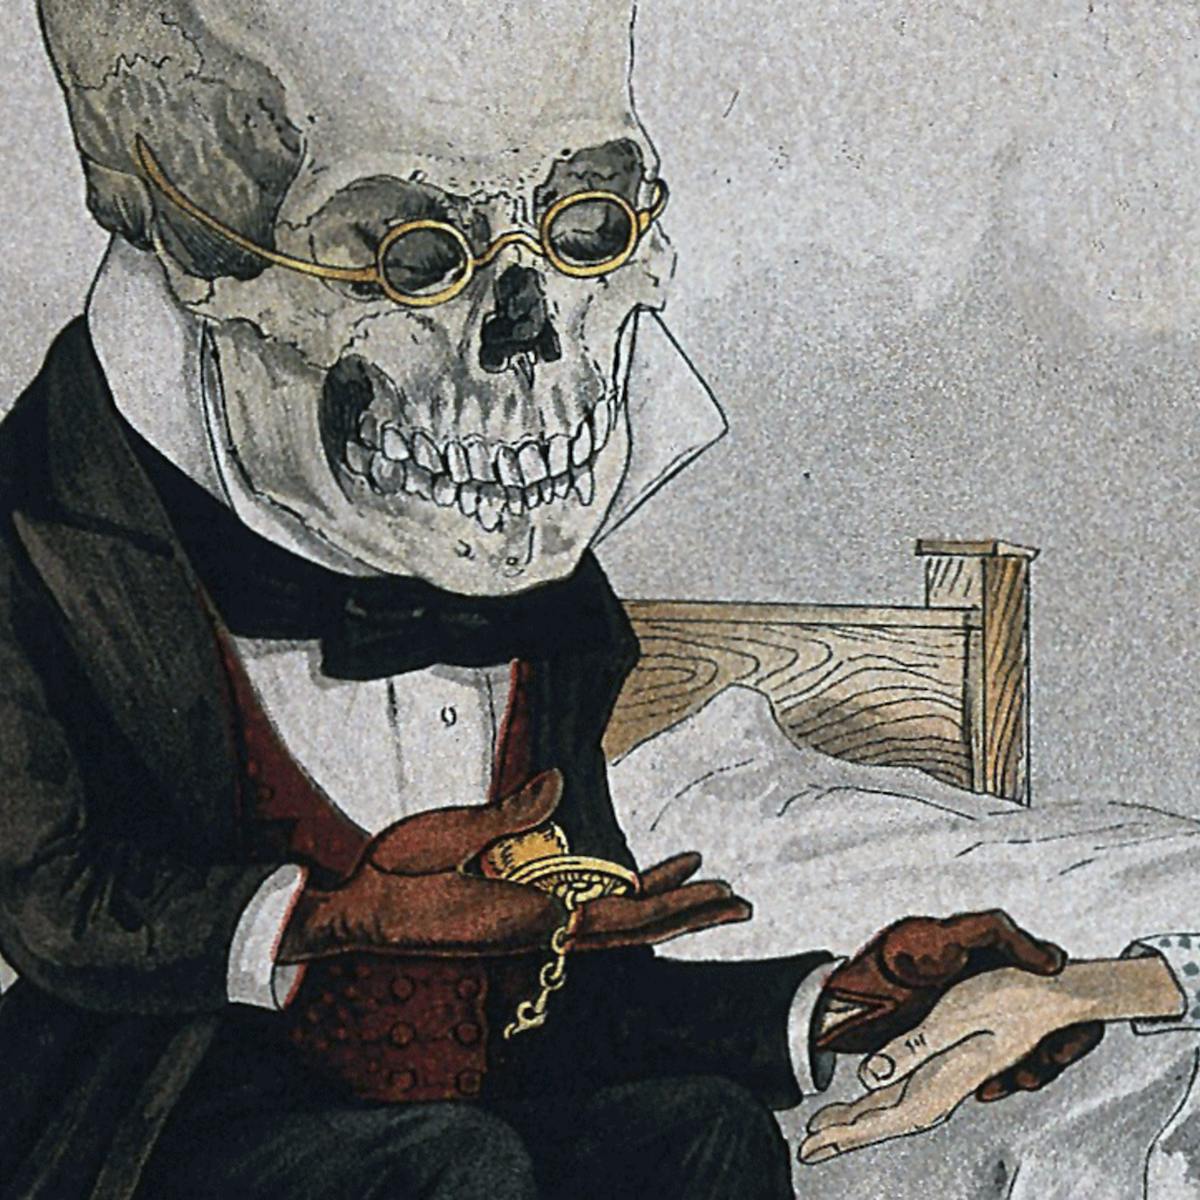 Colour drawing of a person with a bare skull for a head wearing glasses and a frock-coat and using a pocketwatch to take the pulse of the patient whose hand they are holding. 